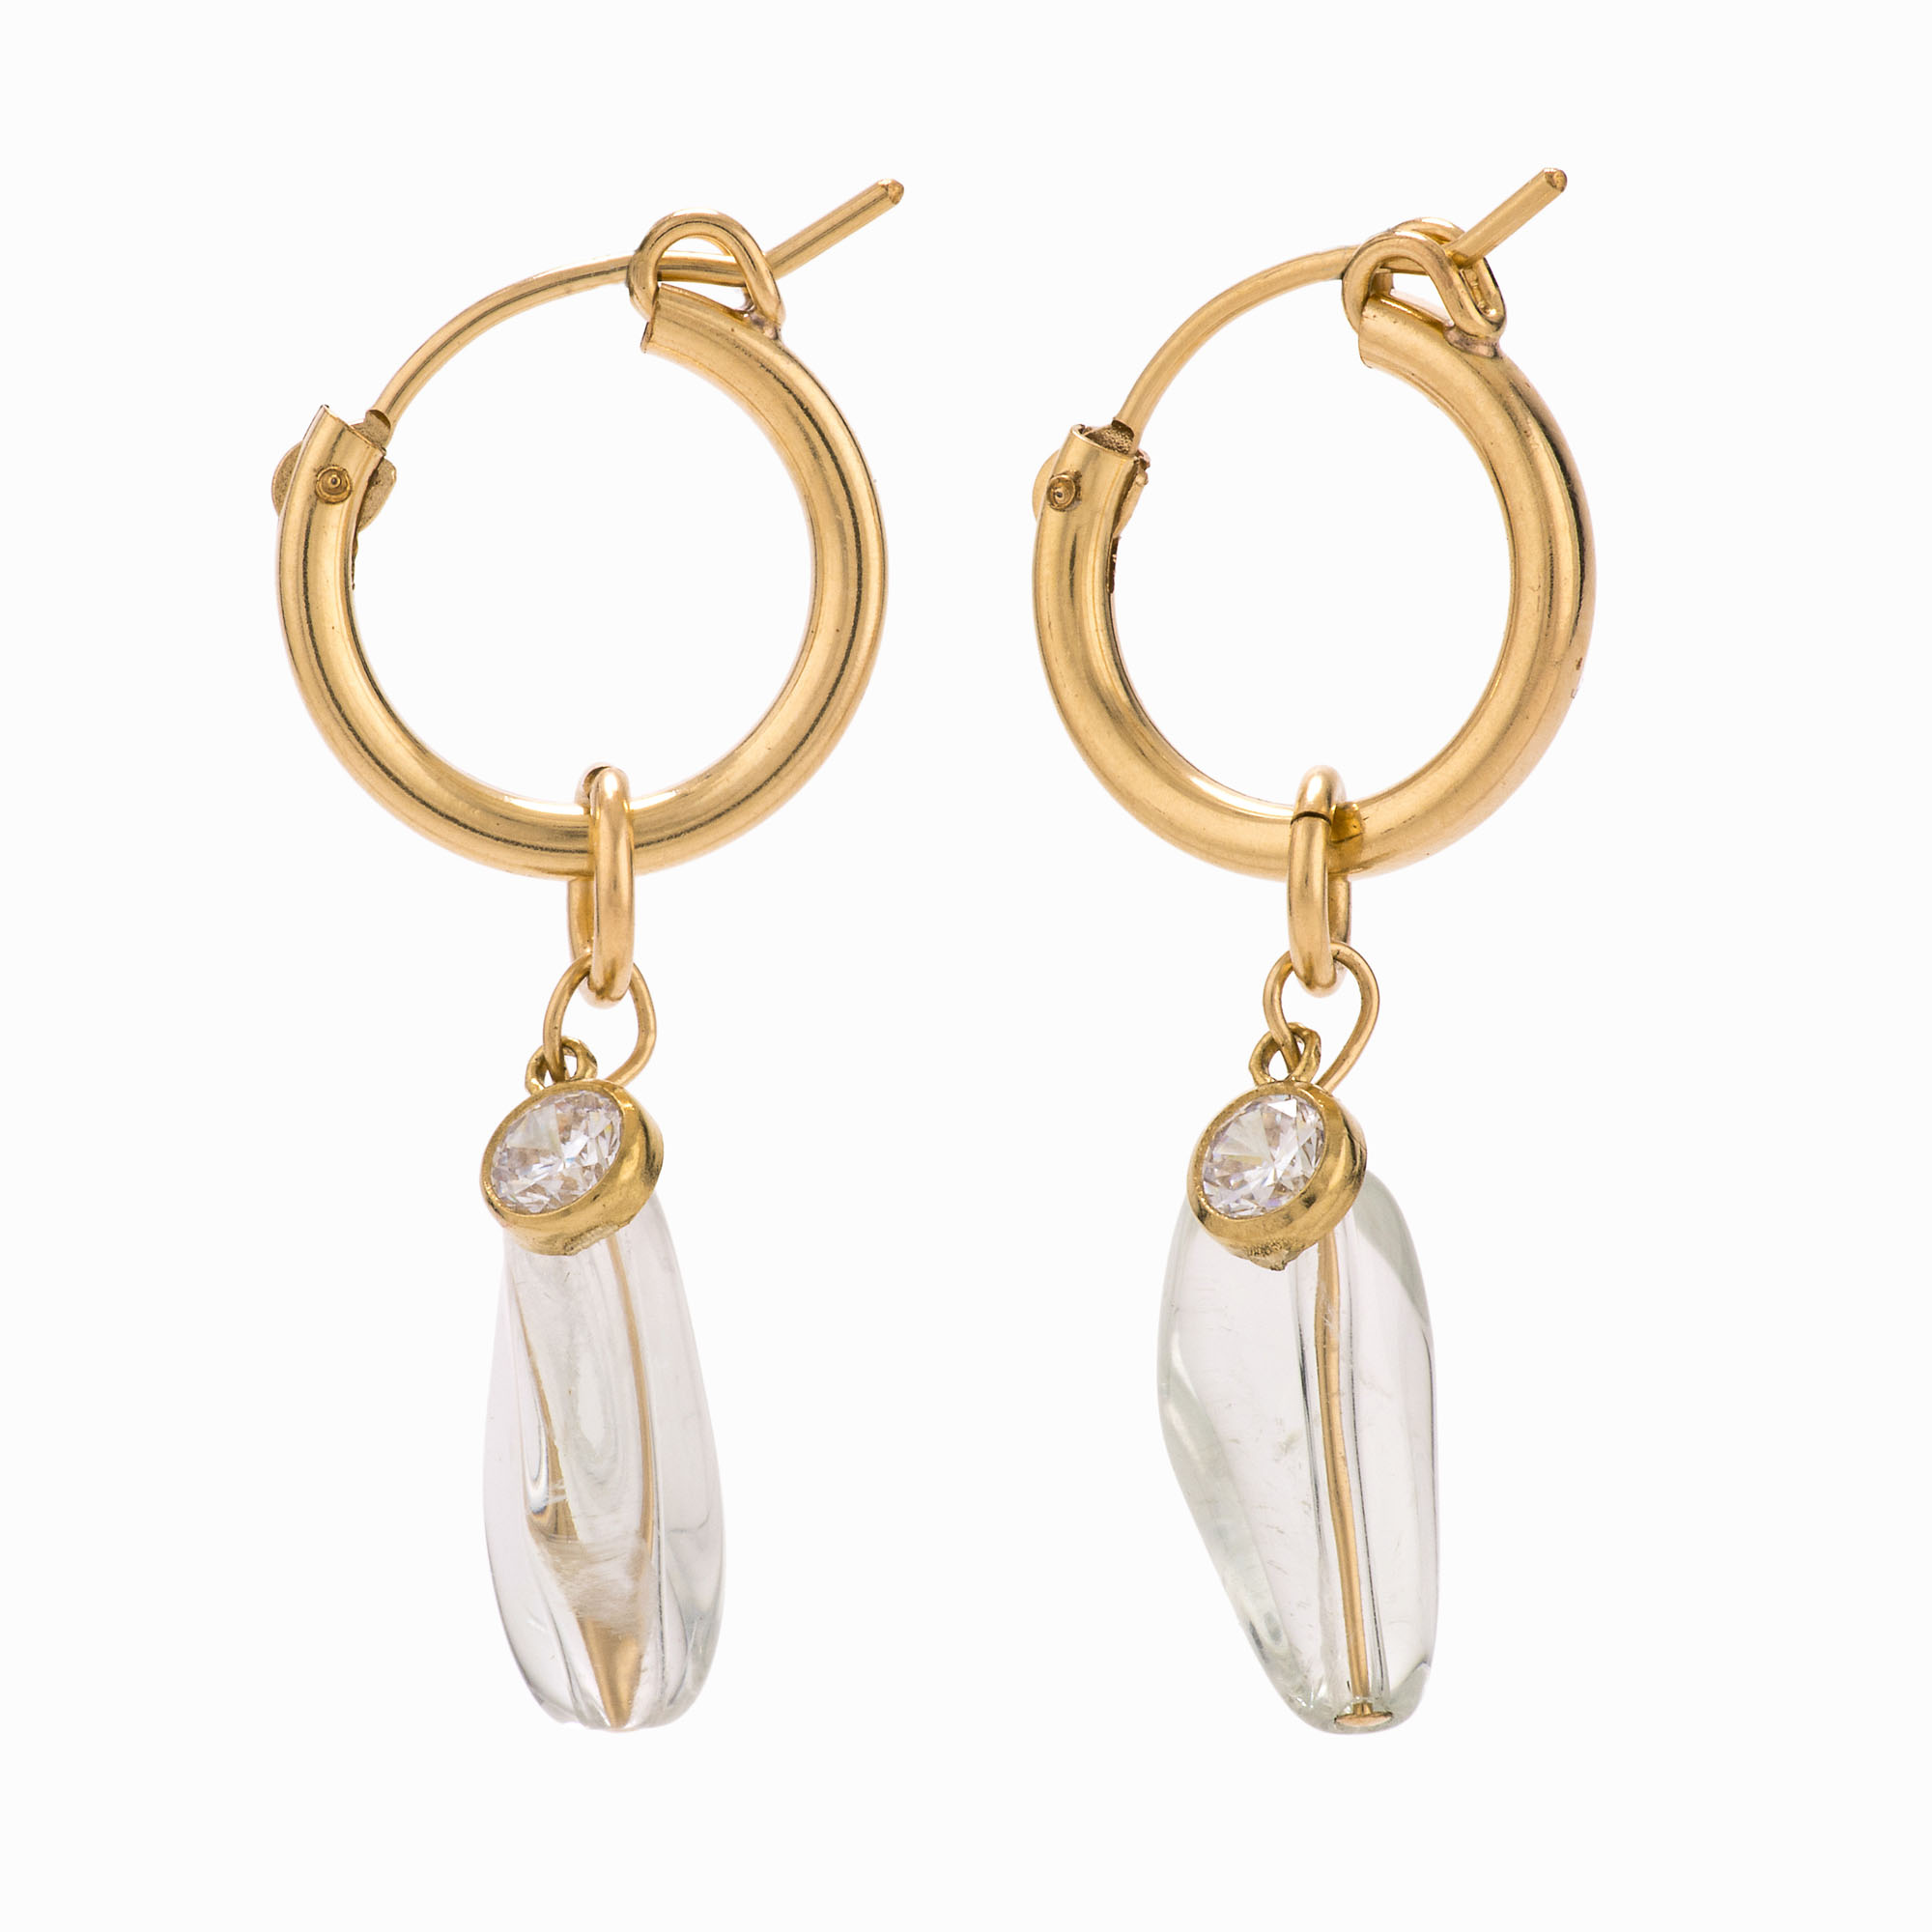 Featured image for “Beck Quartz Earrings”